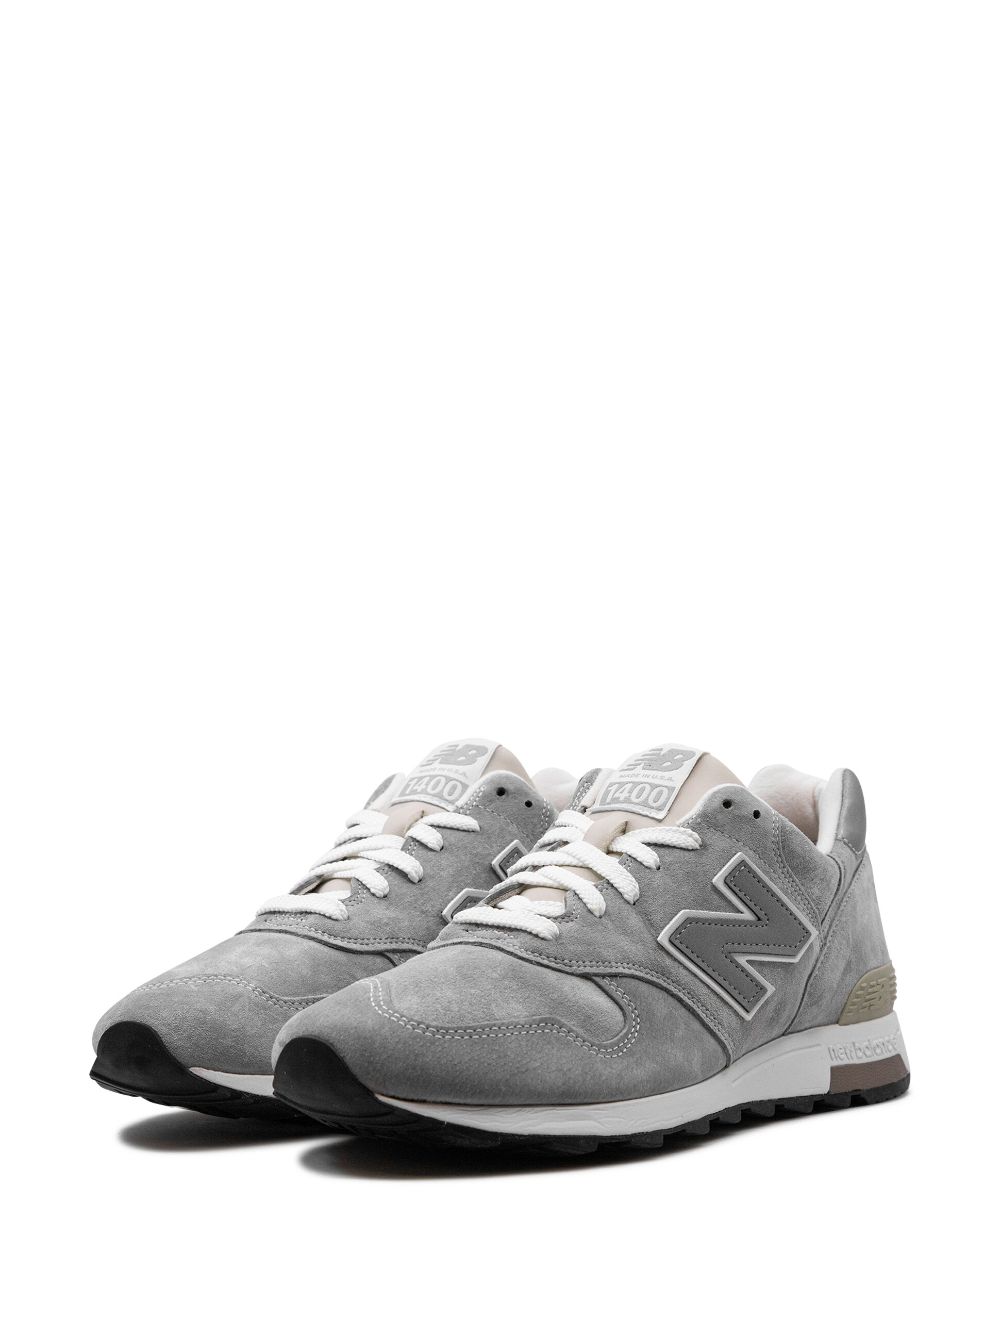 Shop New Balance 1400 "grey" Suede Sneakers